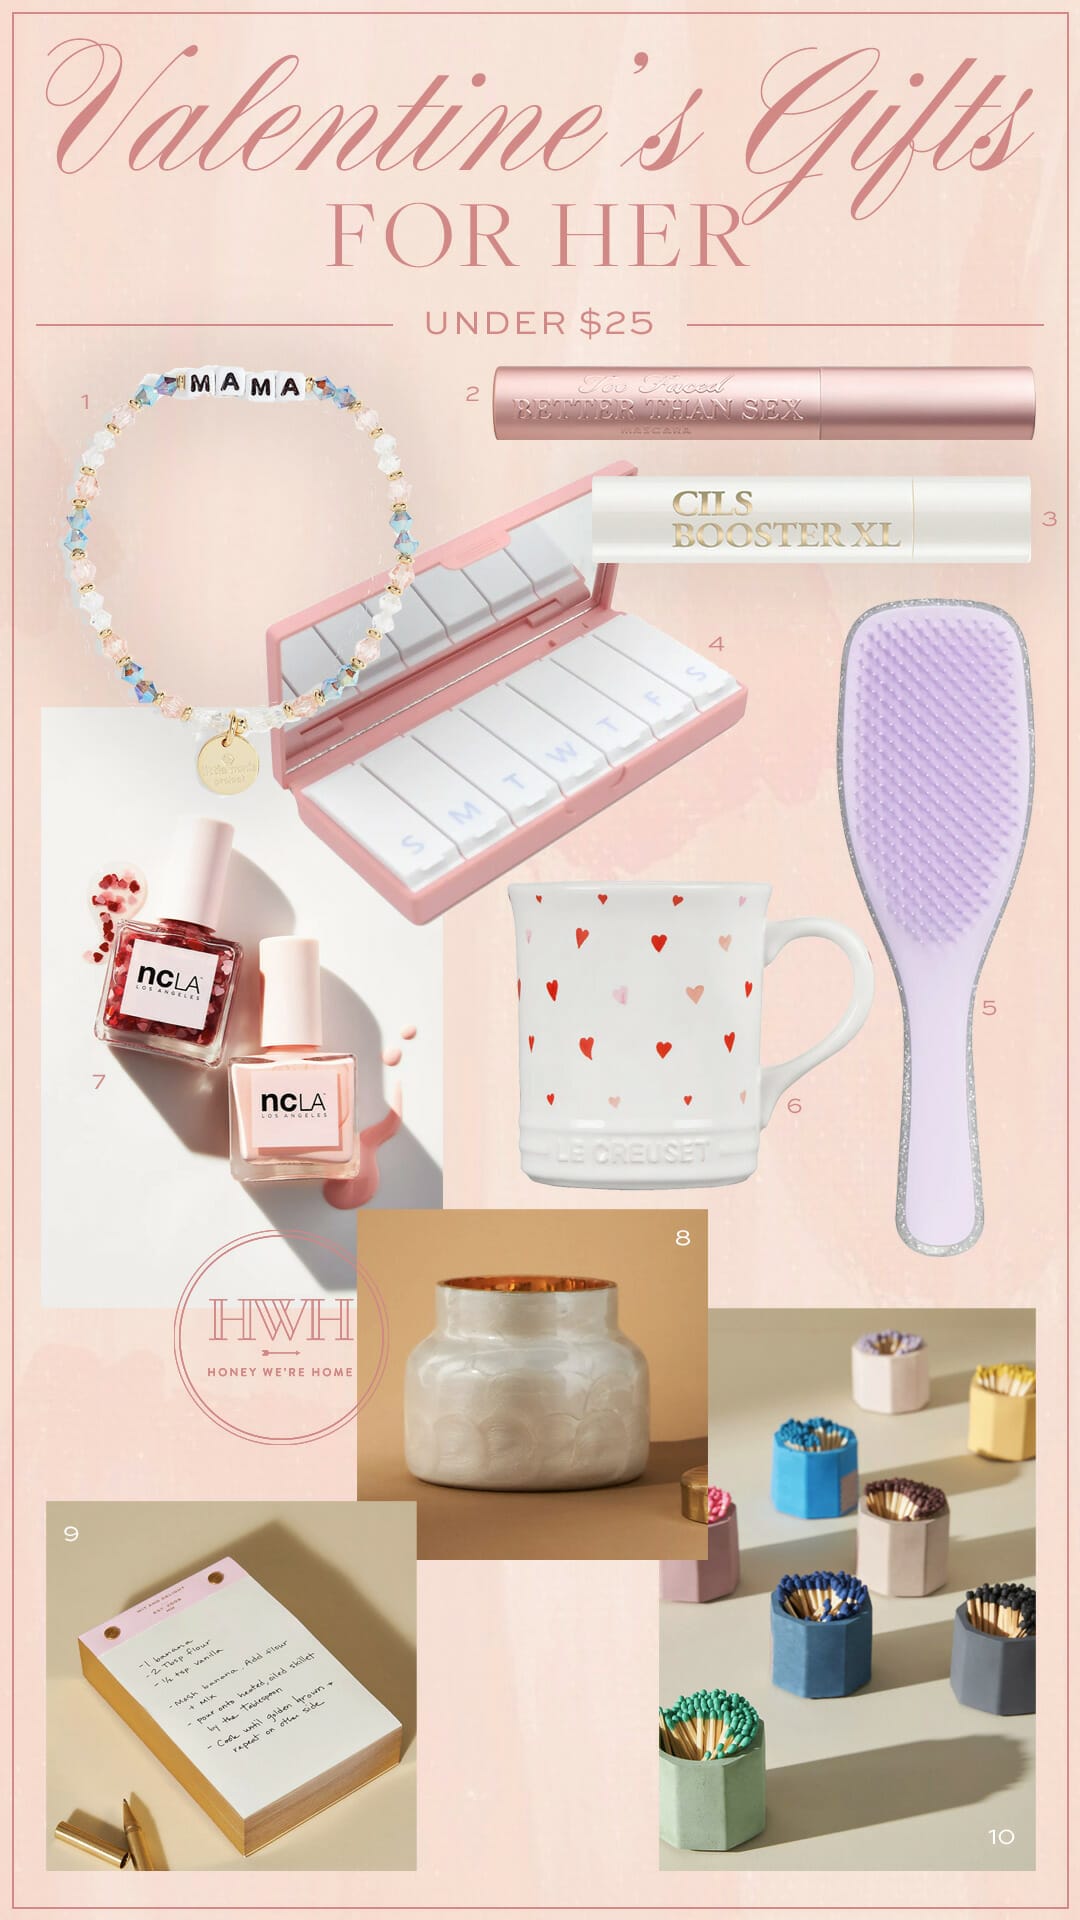 Valentine’s Gifts for Her Under $25